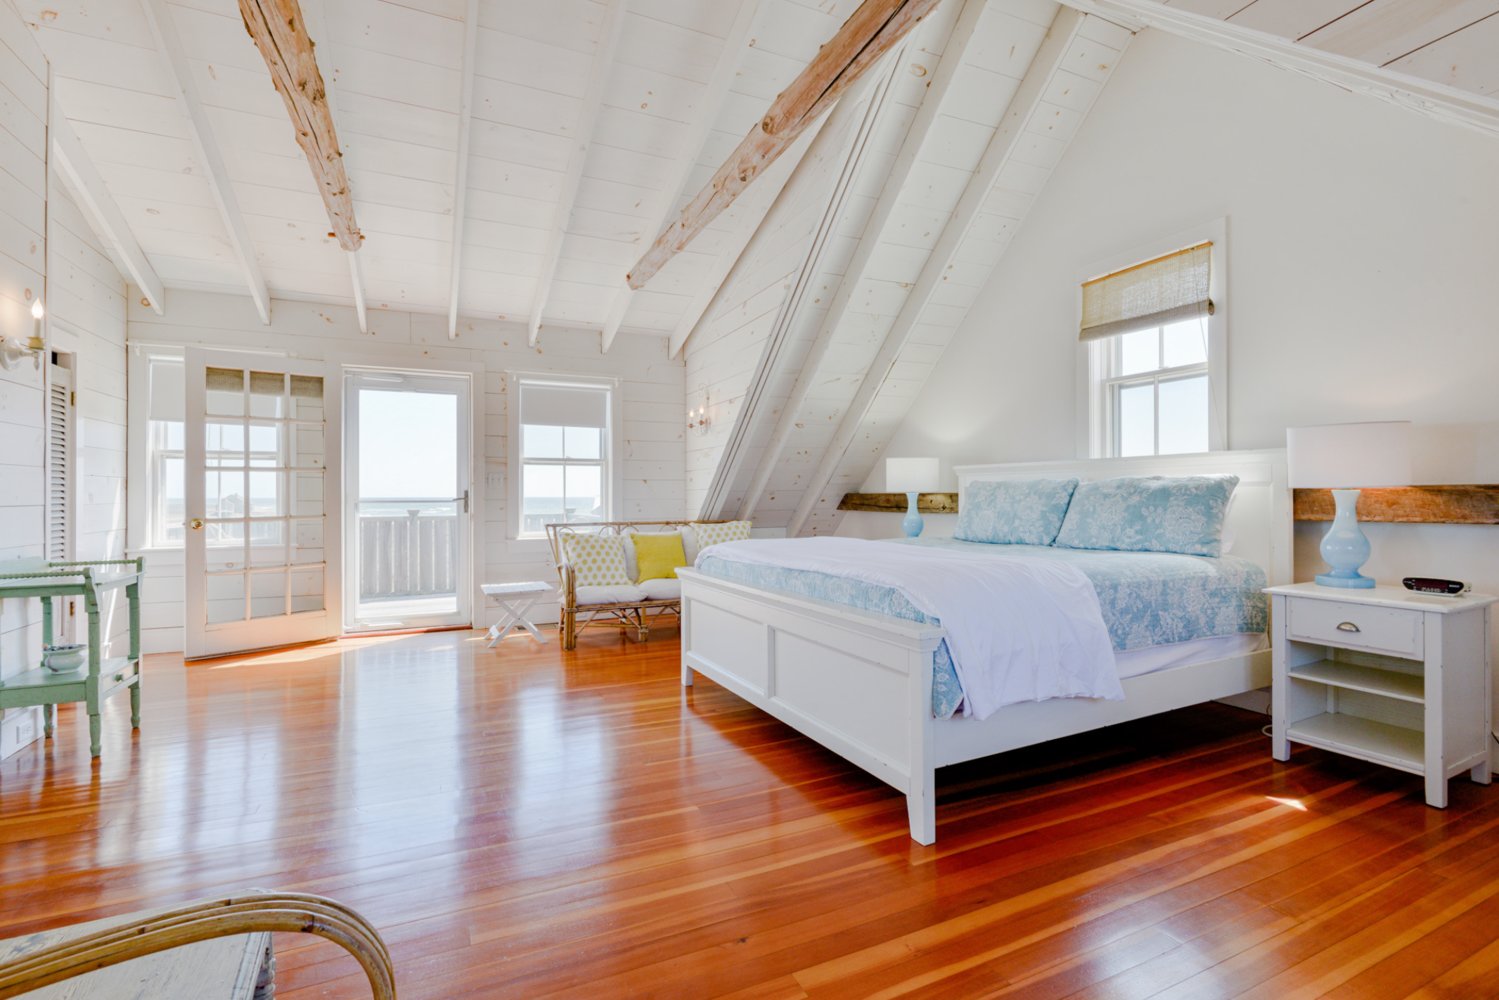 The second-floor master bedroom has a vaulted ceiling and a private deck.